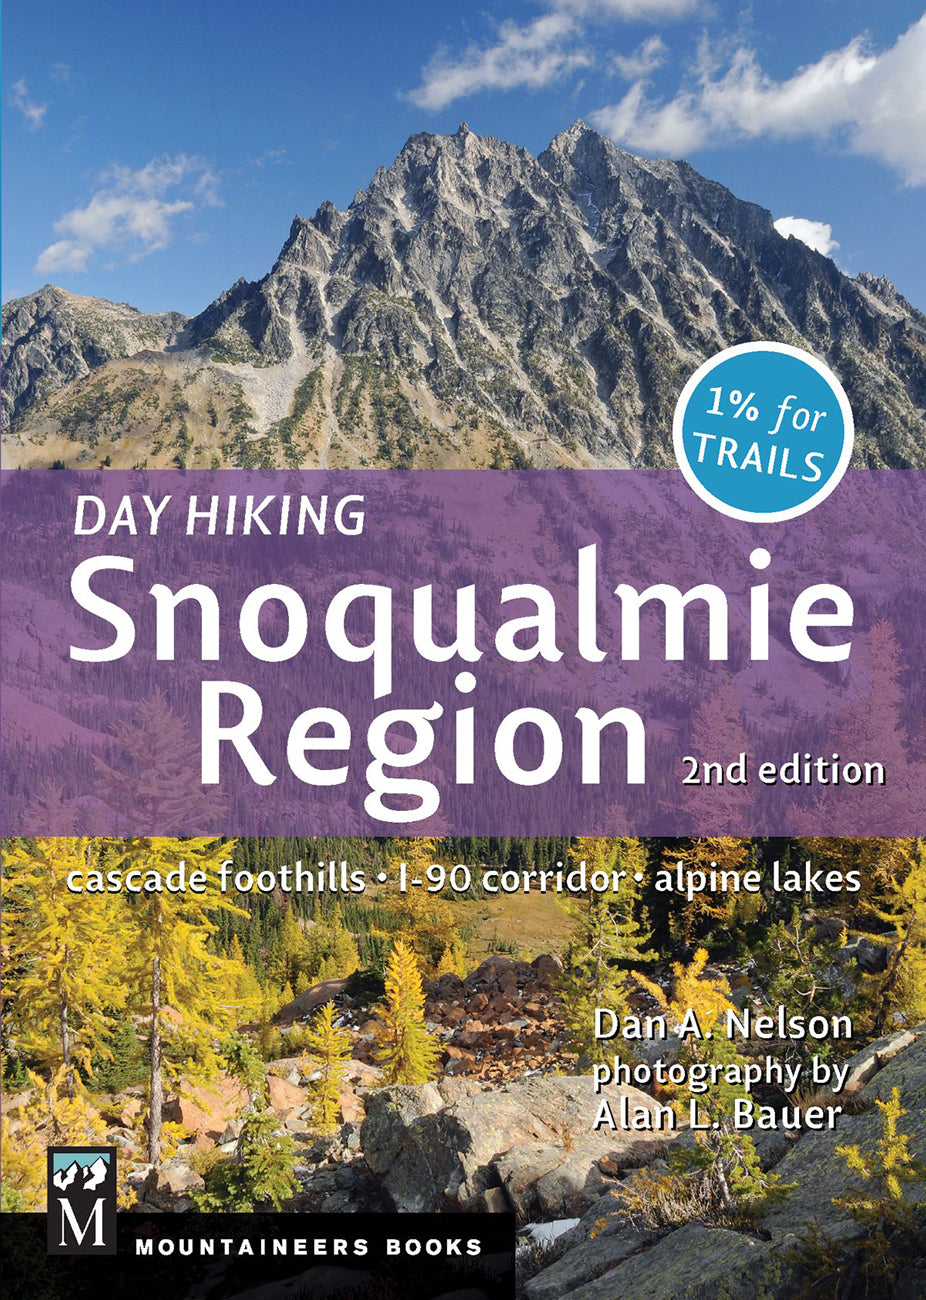 Day Hiking: Snoqualmie Region, 2nd Edition